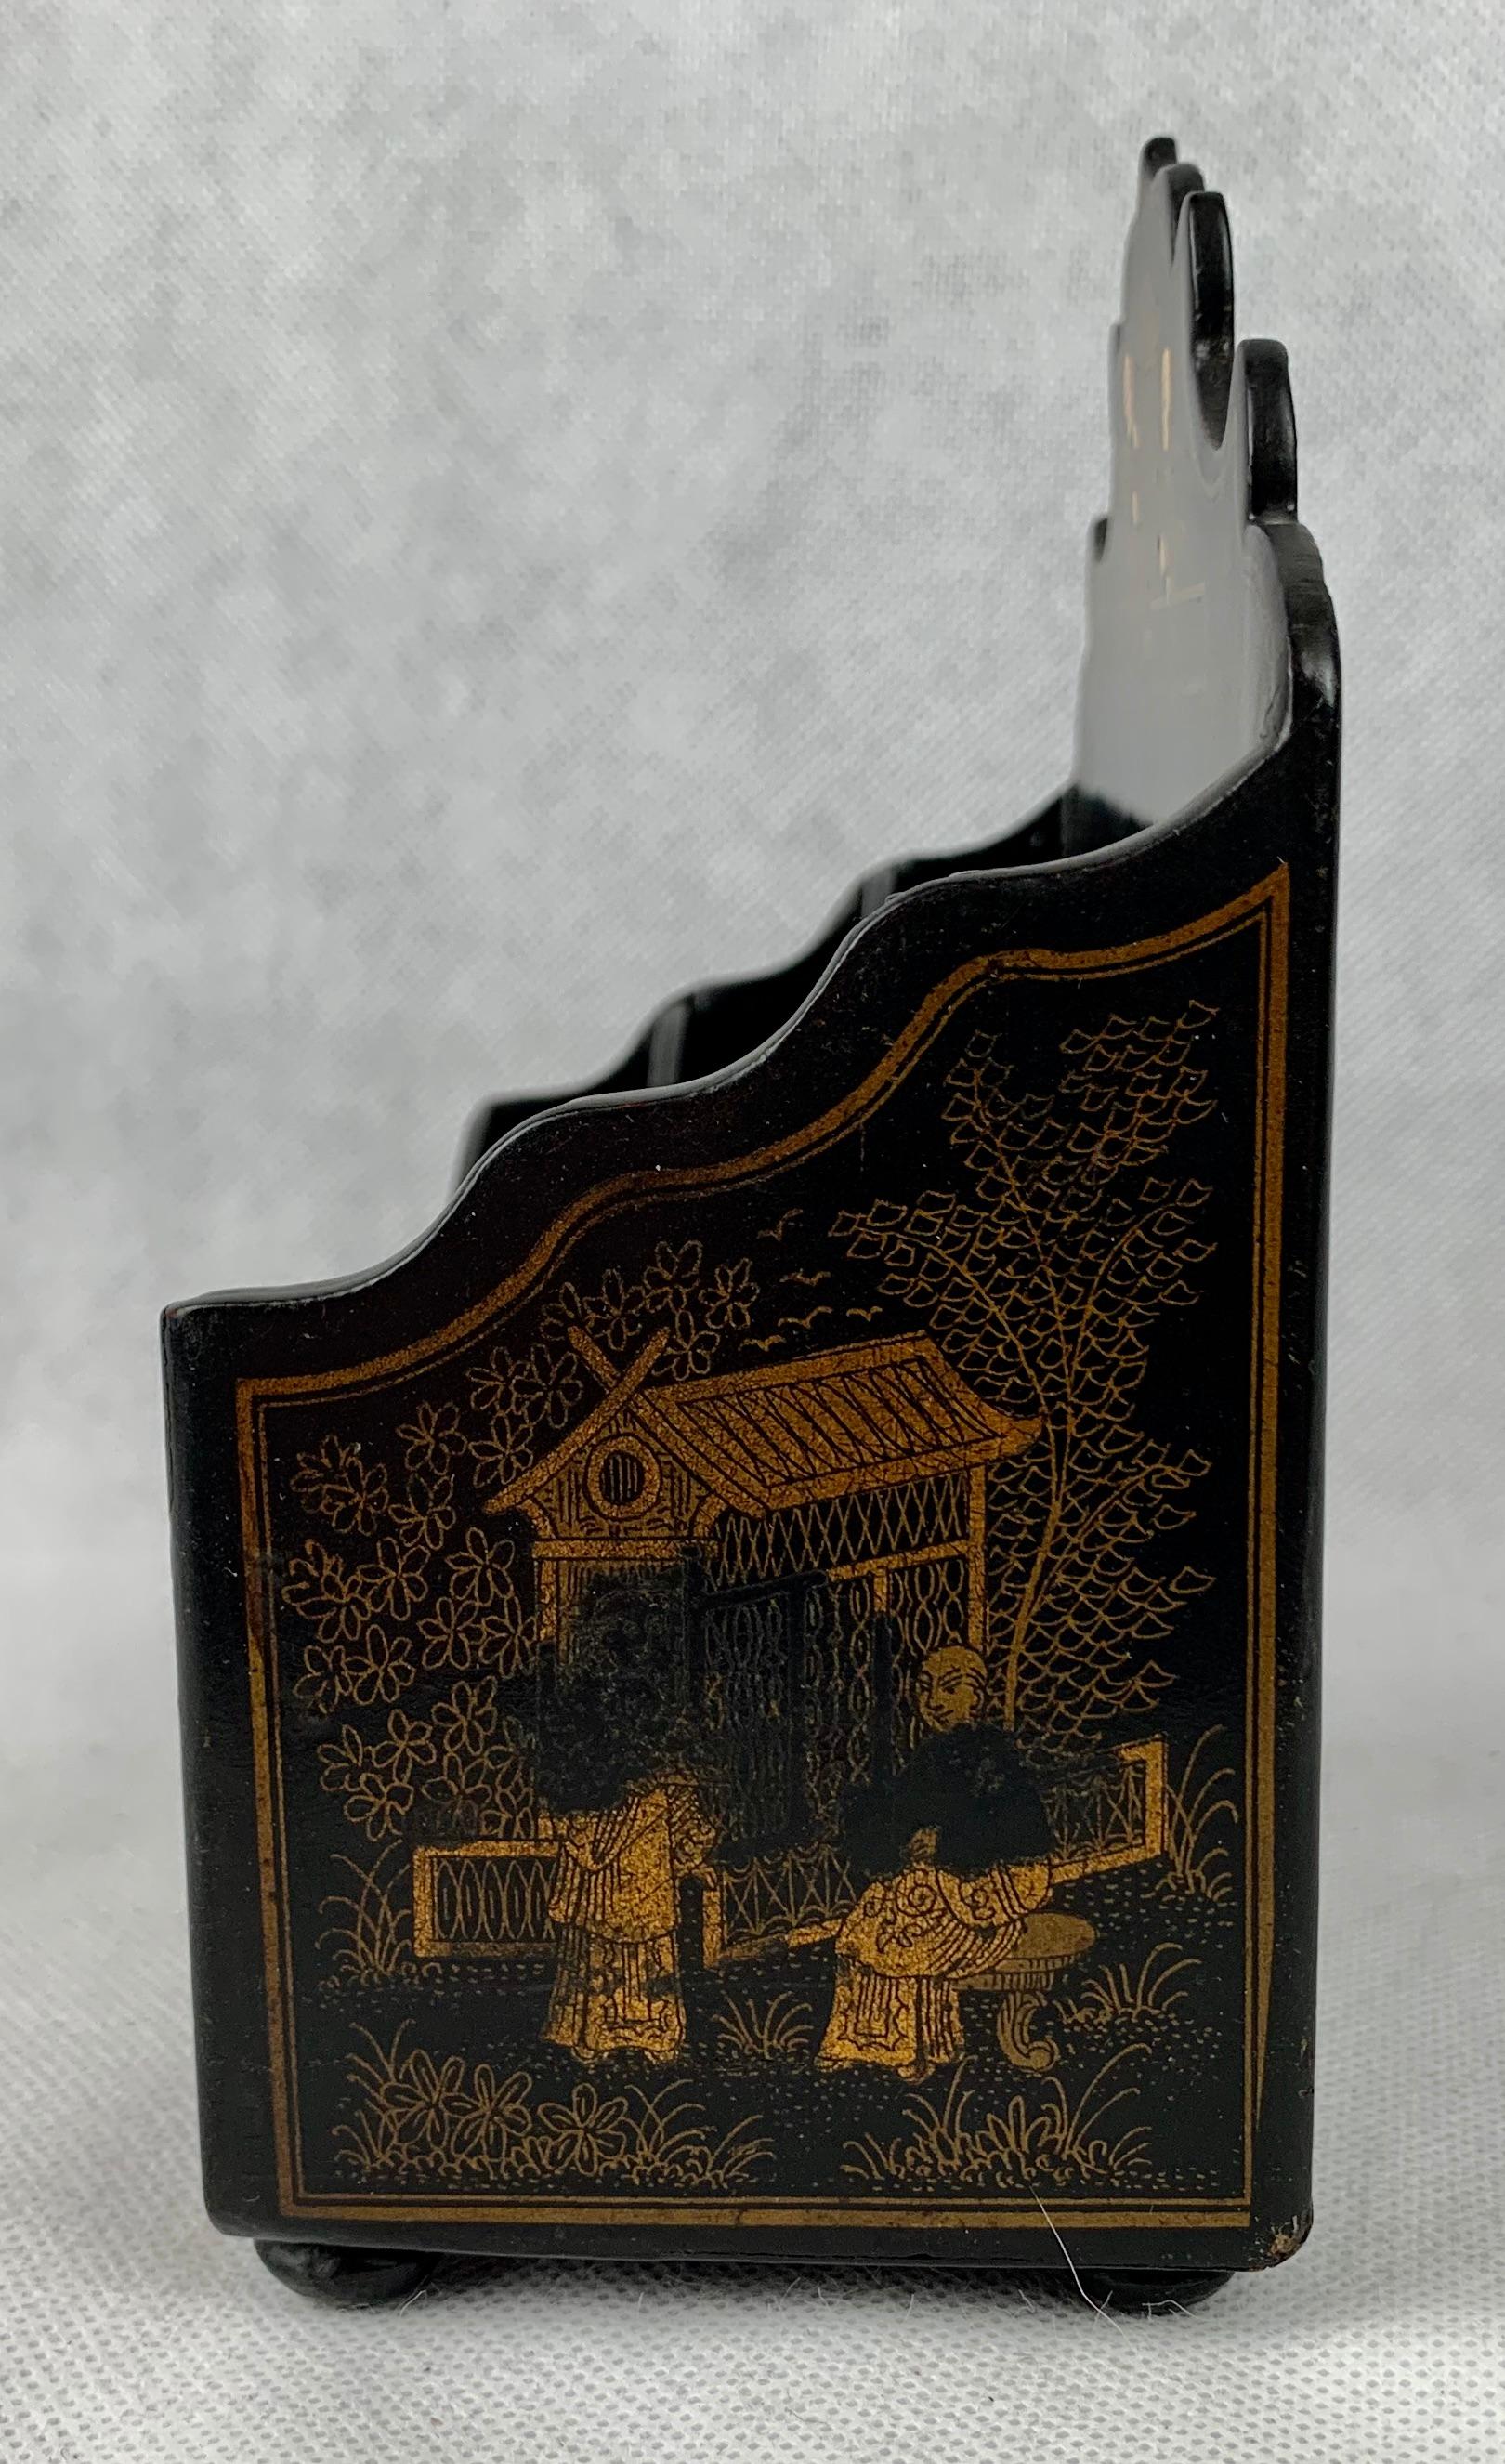 Hand-Crafted Letter Holder-Black Lacquer on Papier Mâché with Gilt Chinoiserie Scenes